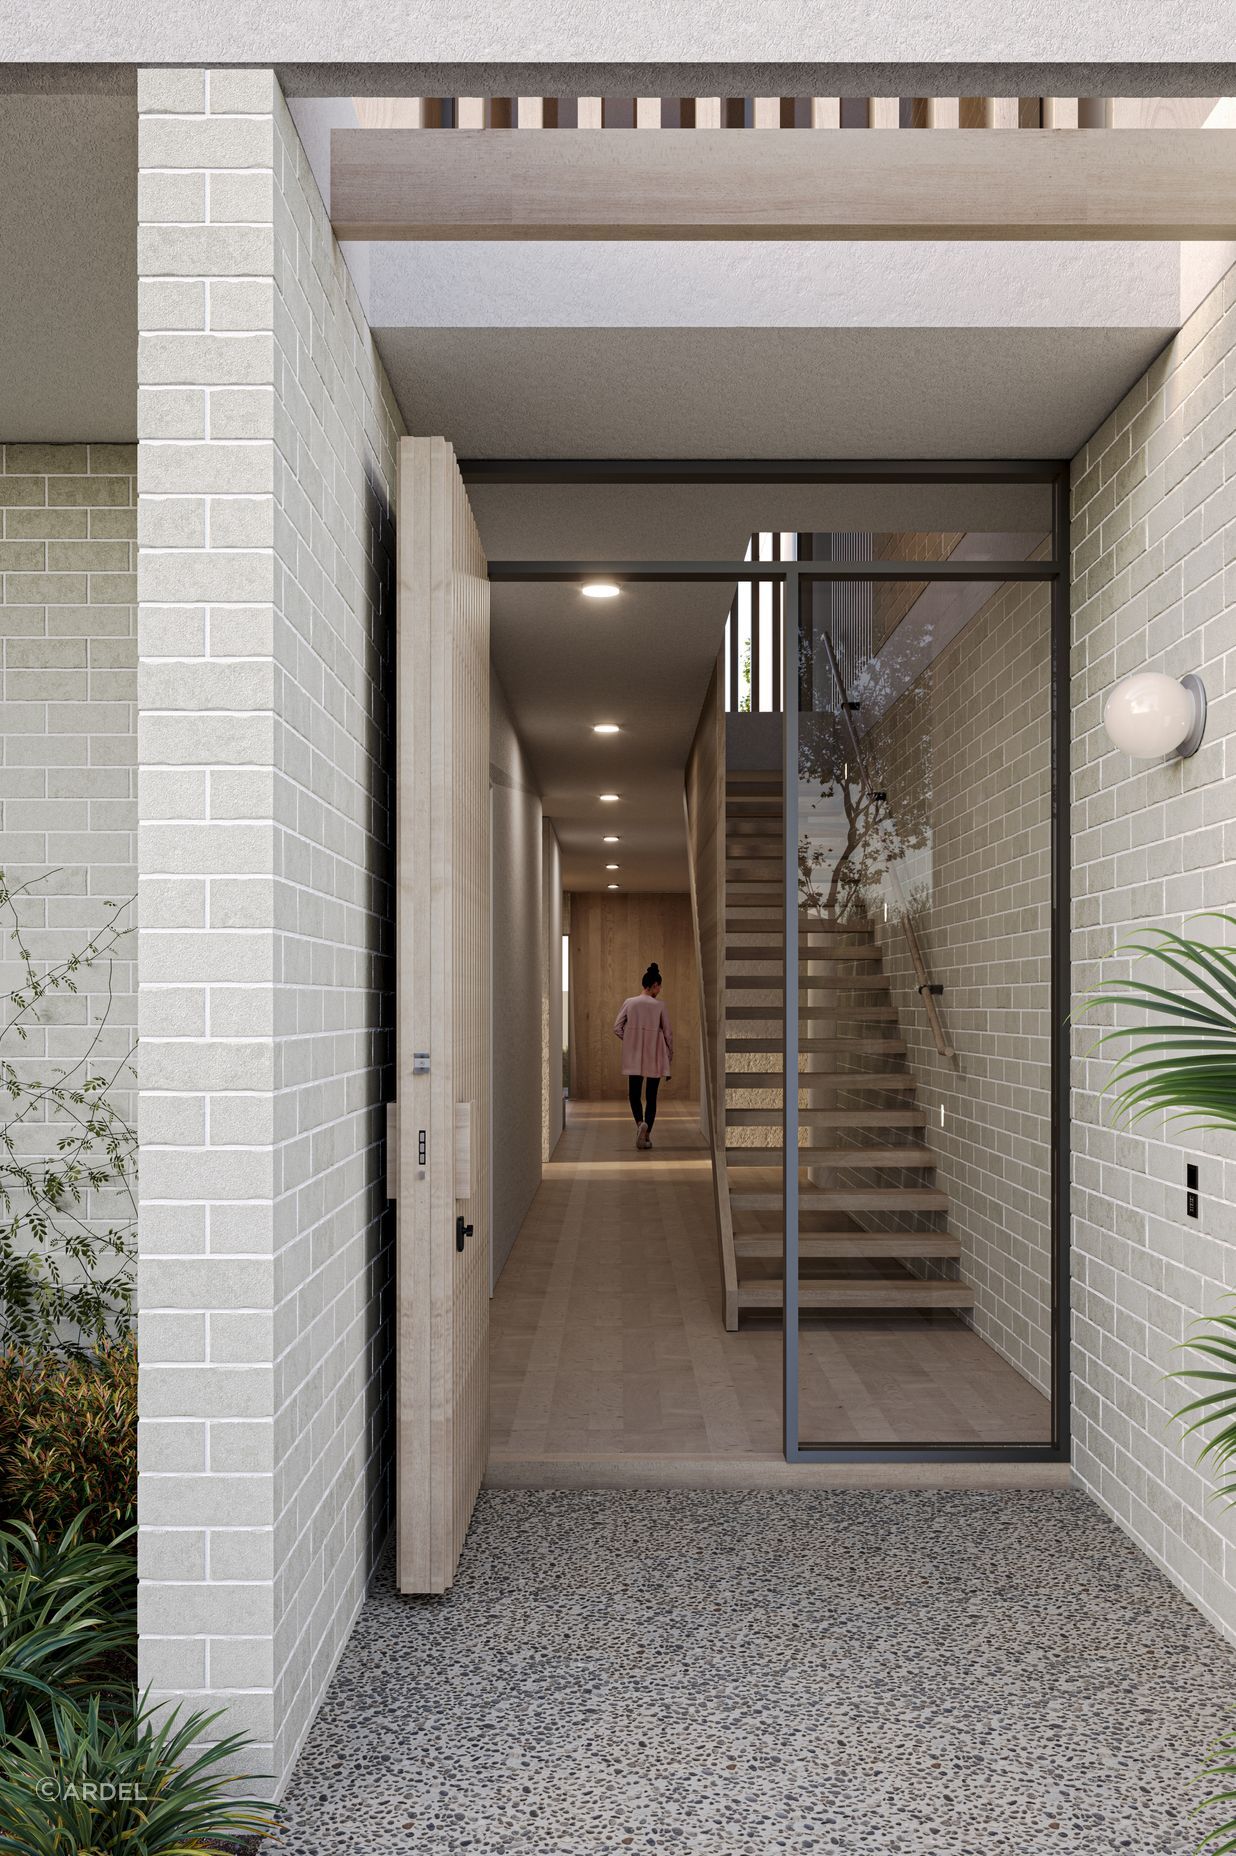  Bordered by light concrete brick walls, Cantilever’s entrance ushers natural light into the home via an open roof structure that compliments the entry. To the right, a double fronted garage hides discretely behind a pale timber façade, slotting carefully into the design of the built form.